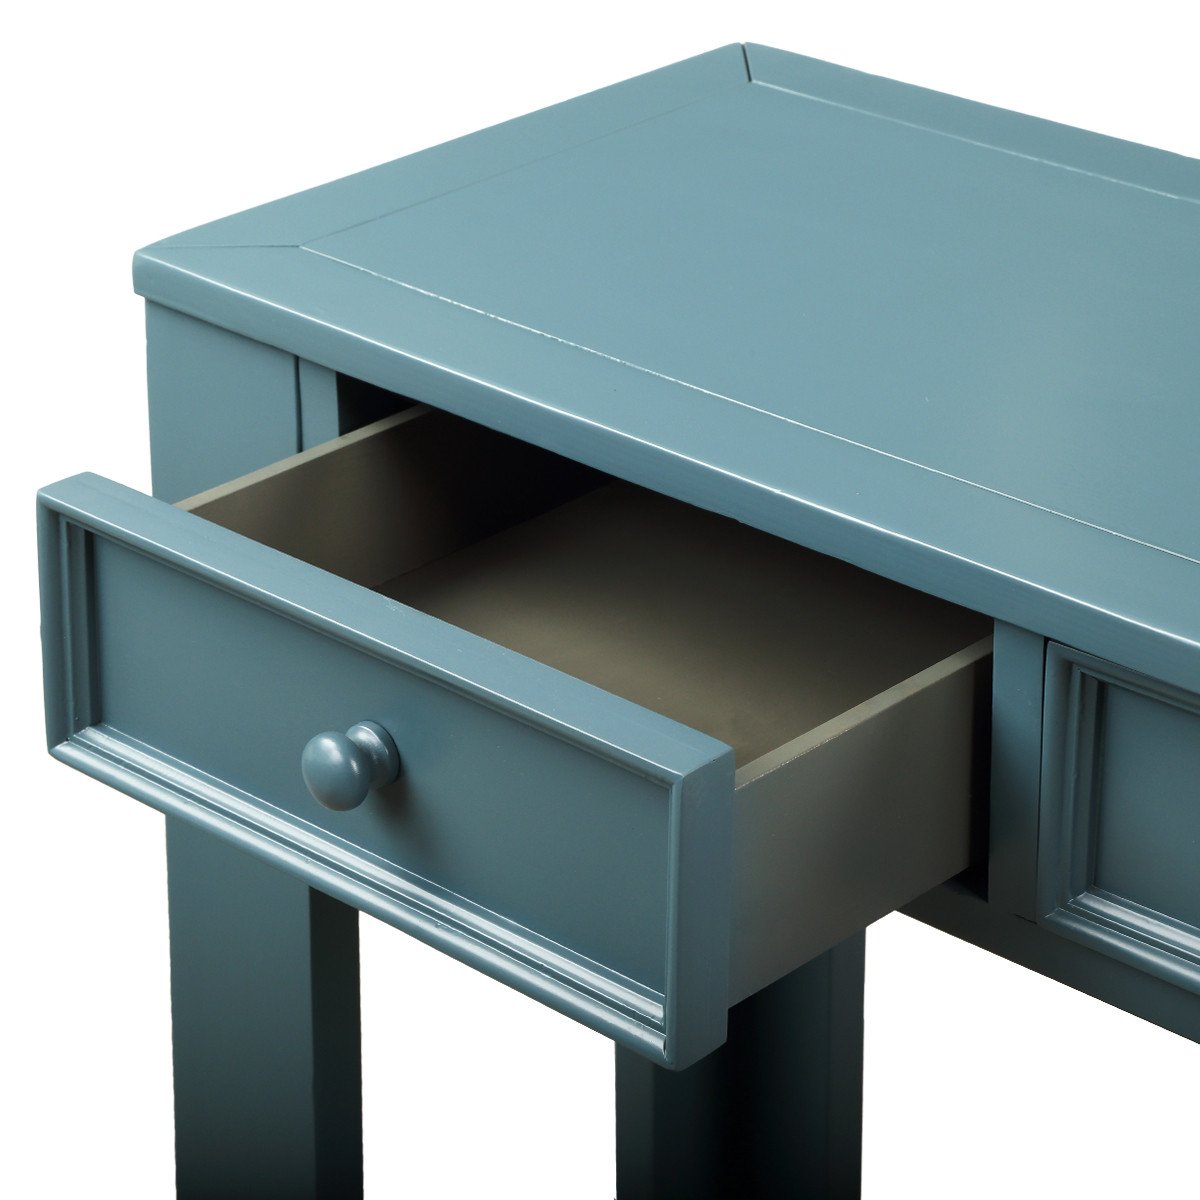 Console Table for Entryway Hallway Sofa Table with Storage Drawers and Bottom Shelf Dark Blue